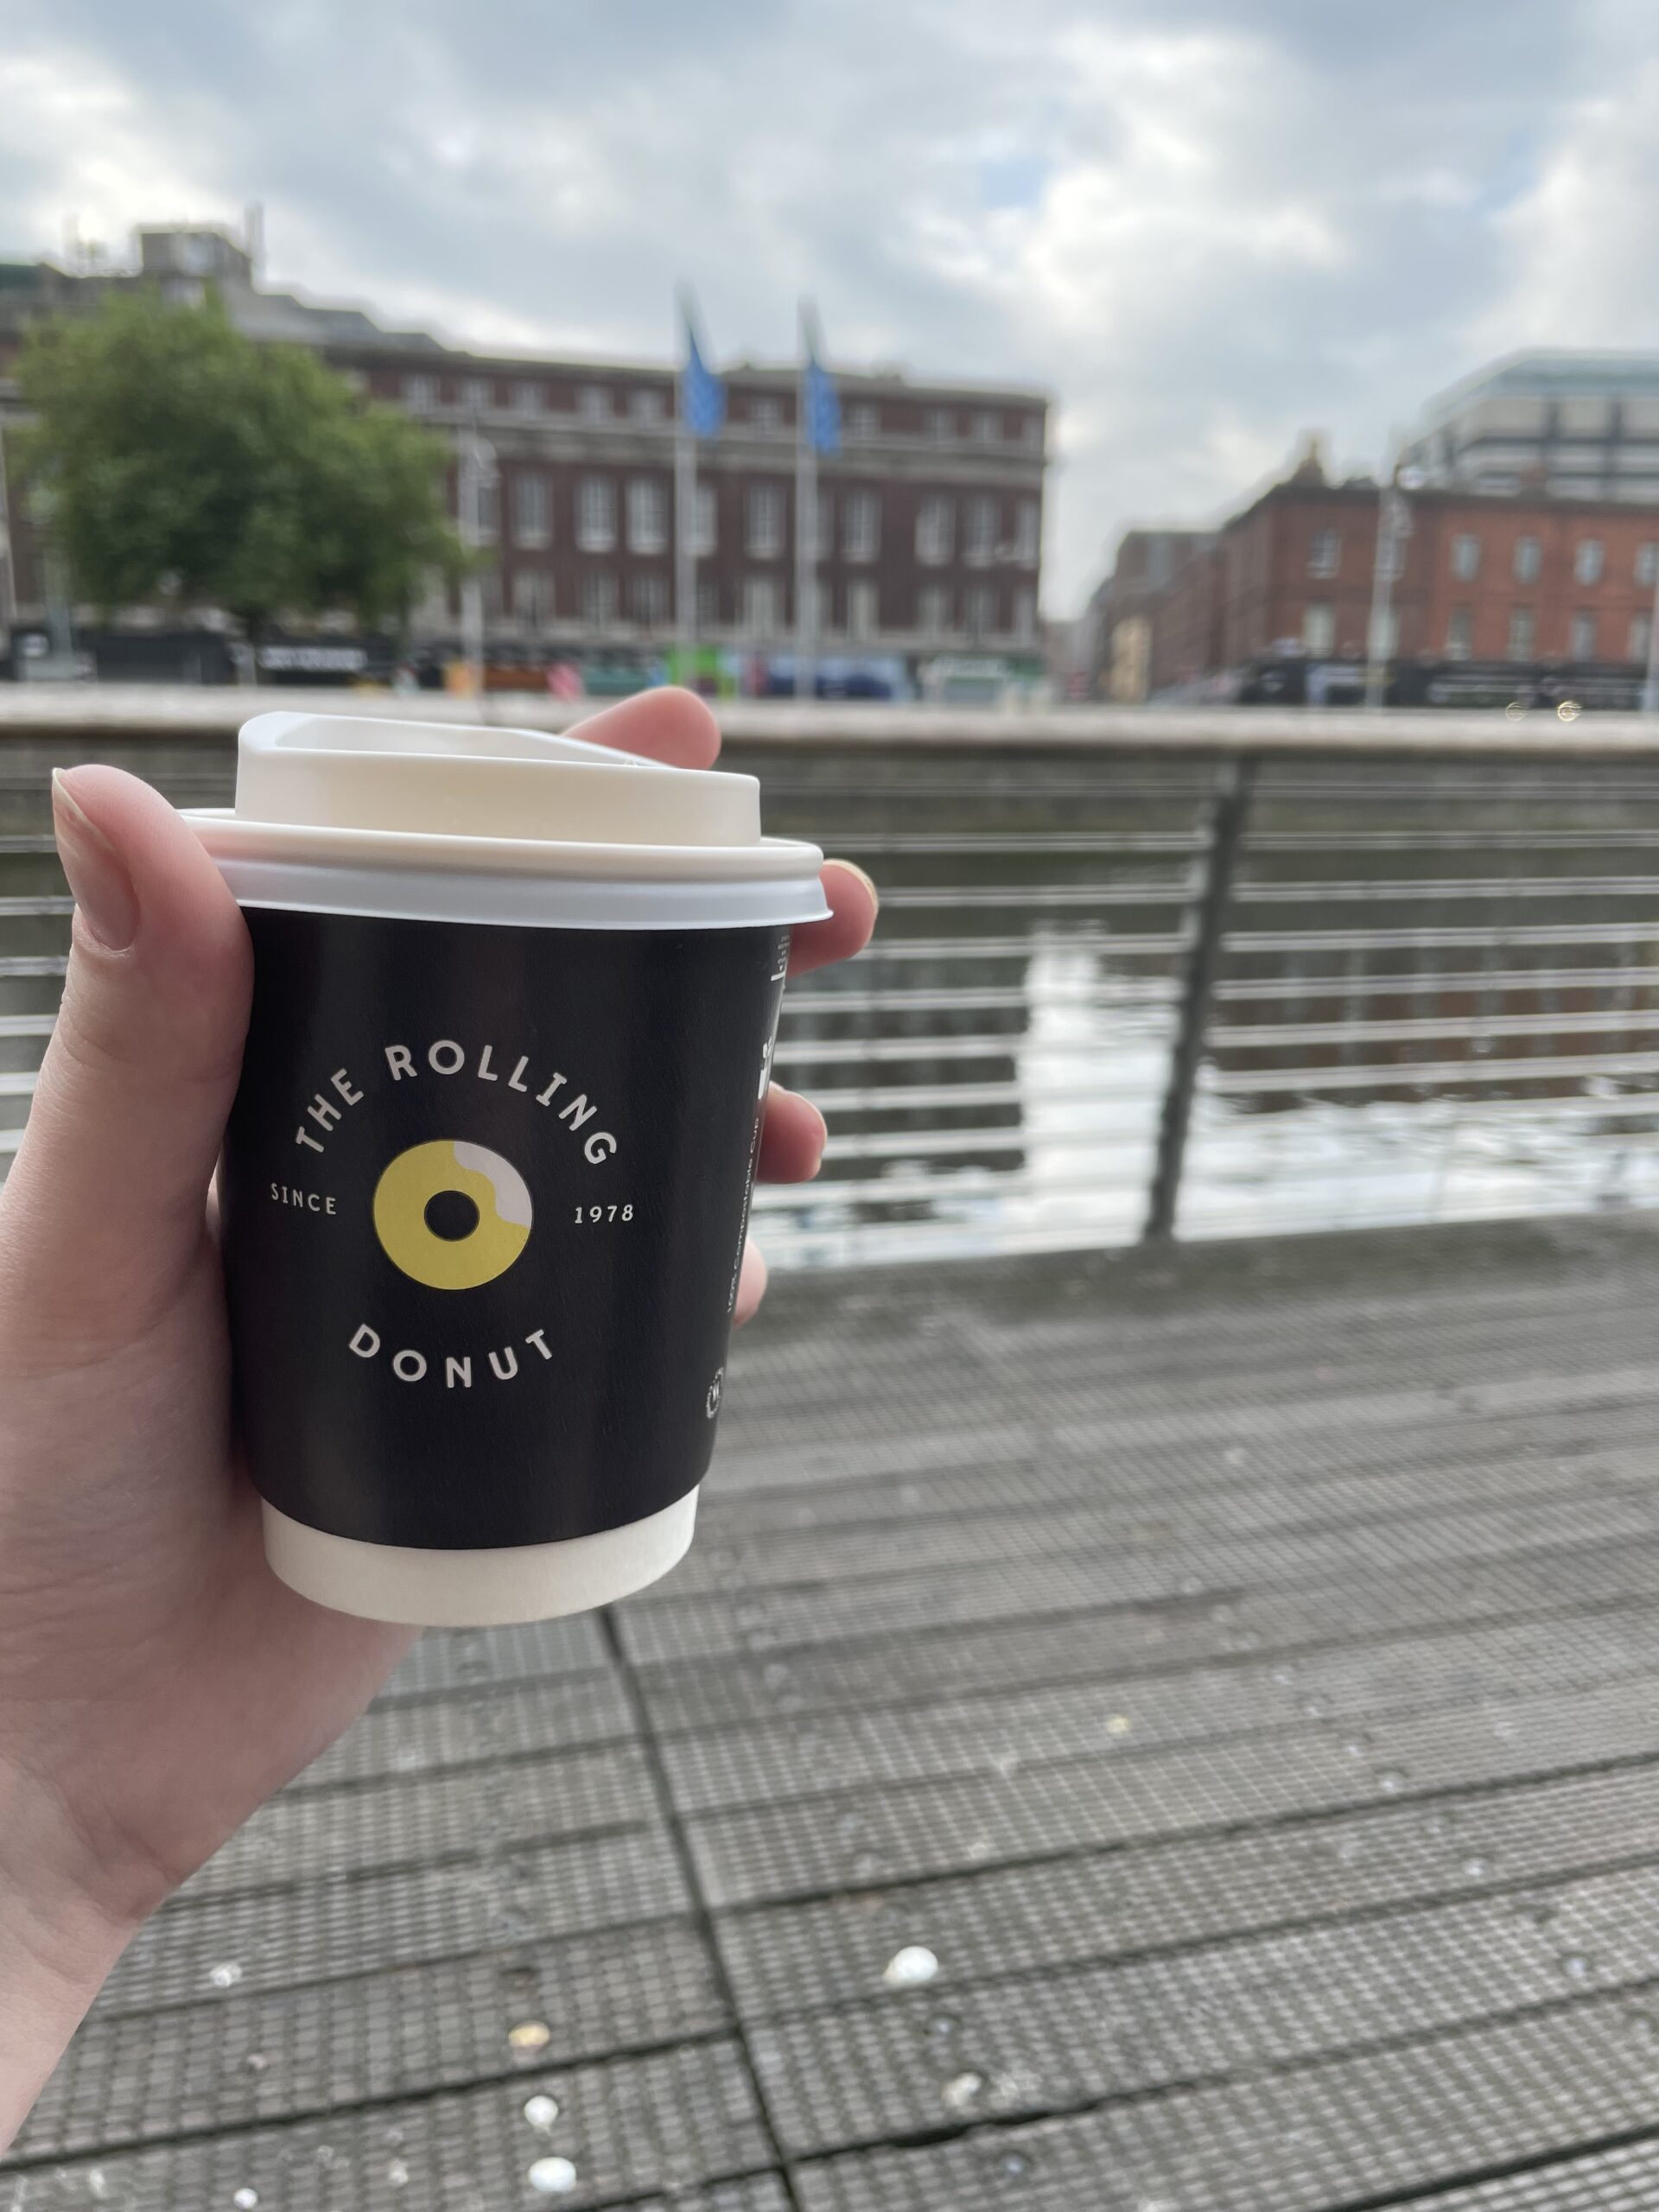 How about some morning coffee and donut from the Rolling Donut right at River Liffey in Dublin.